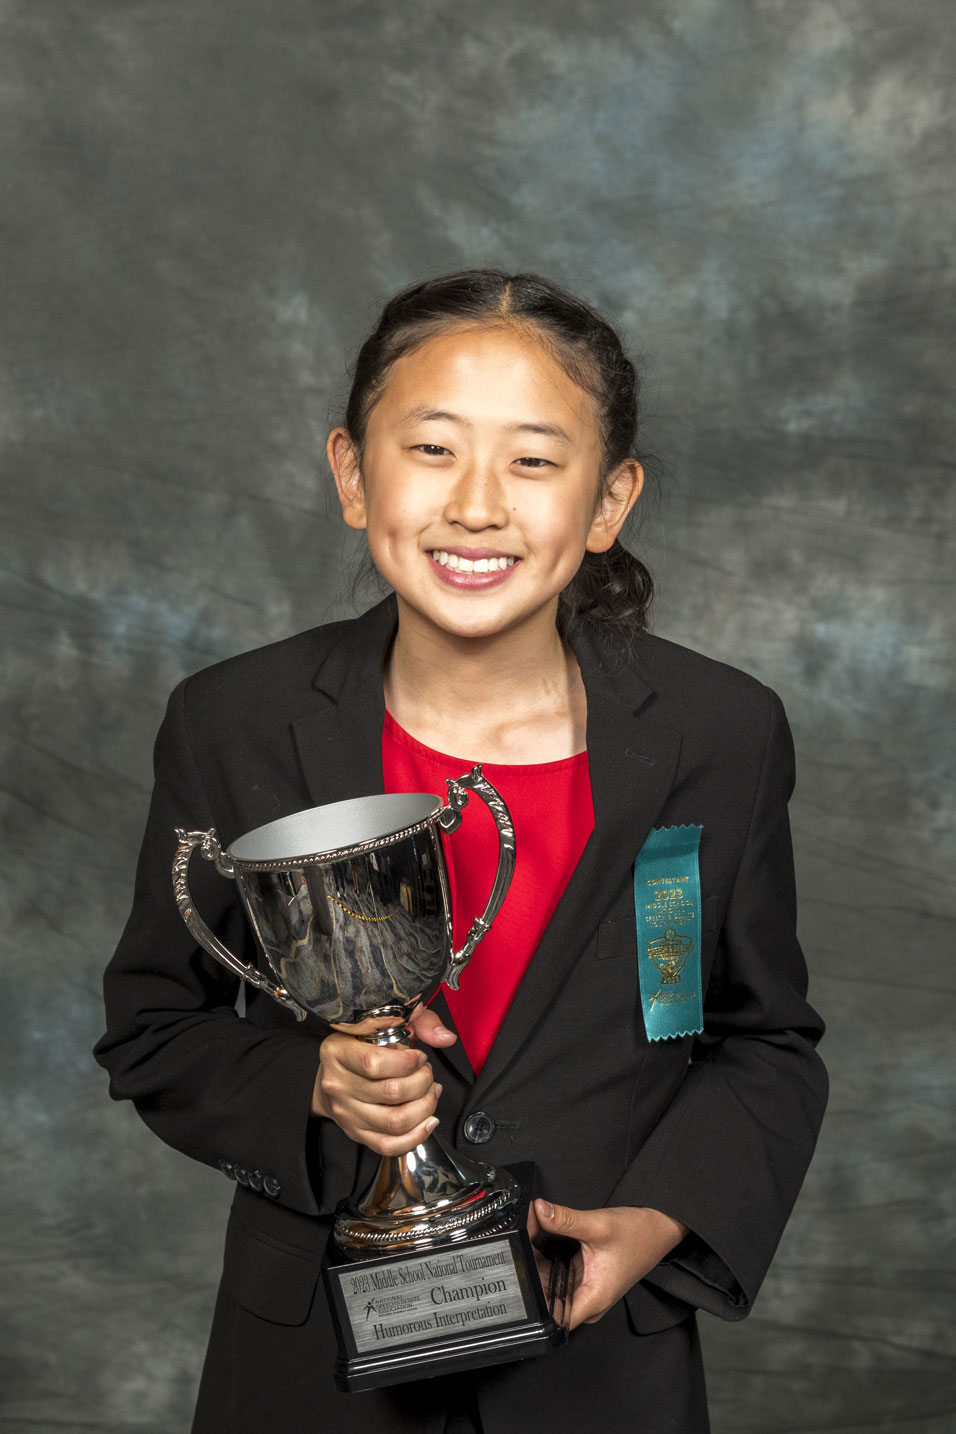 Ella Kim from Robert C. Fisler in California<br />
Coached by Adriena Toghia and Joshua Beckles